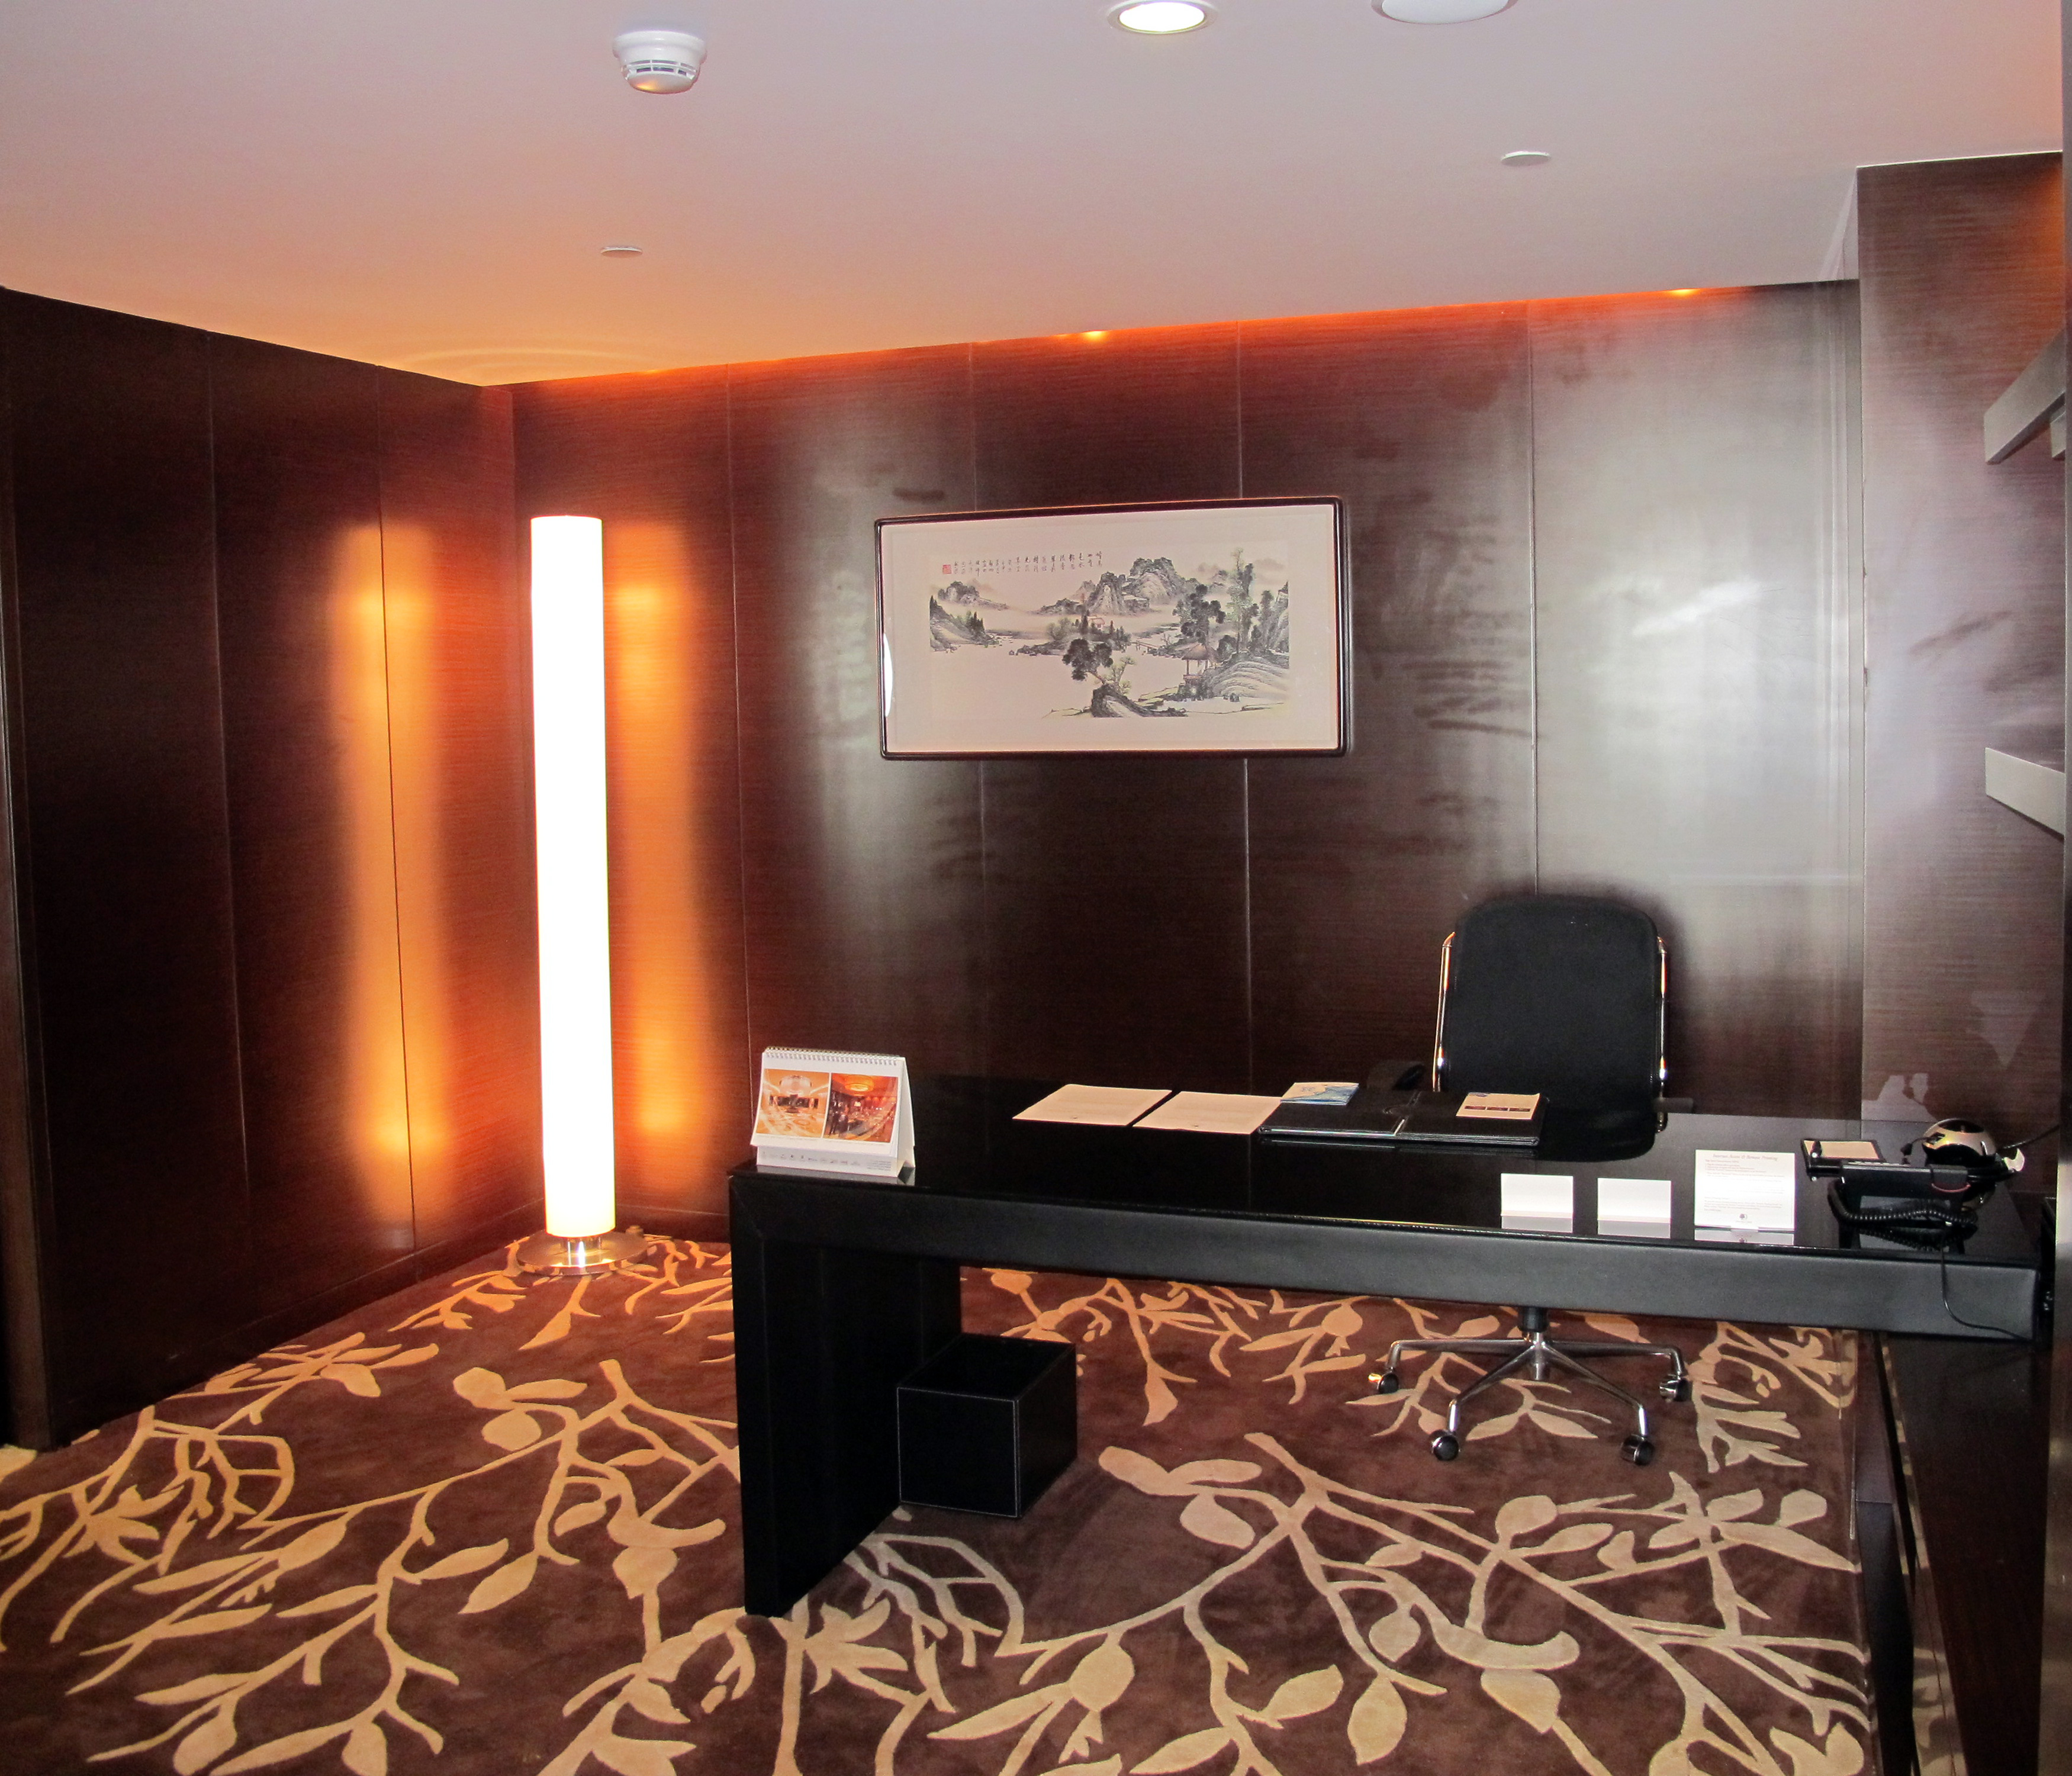 Presidential suite work desk with vertical illuminated floor lamp and art on the wall